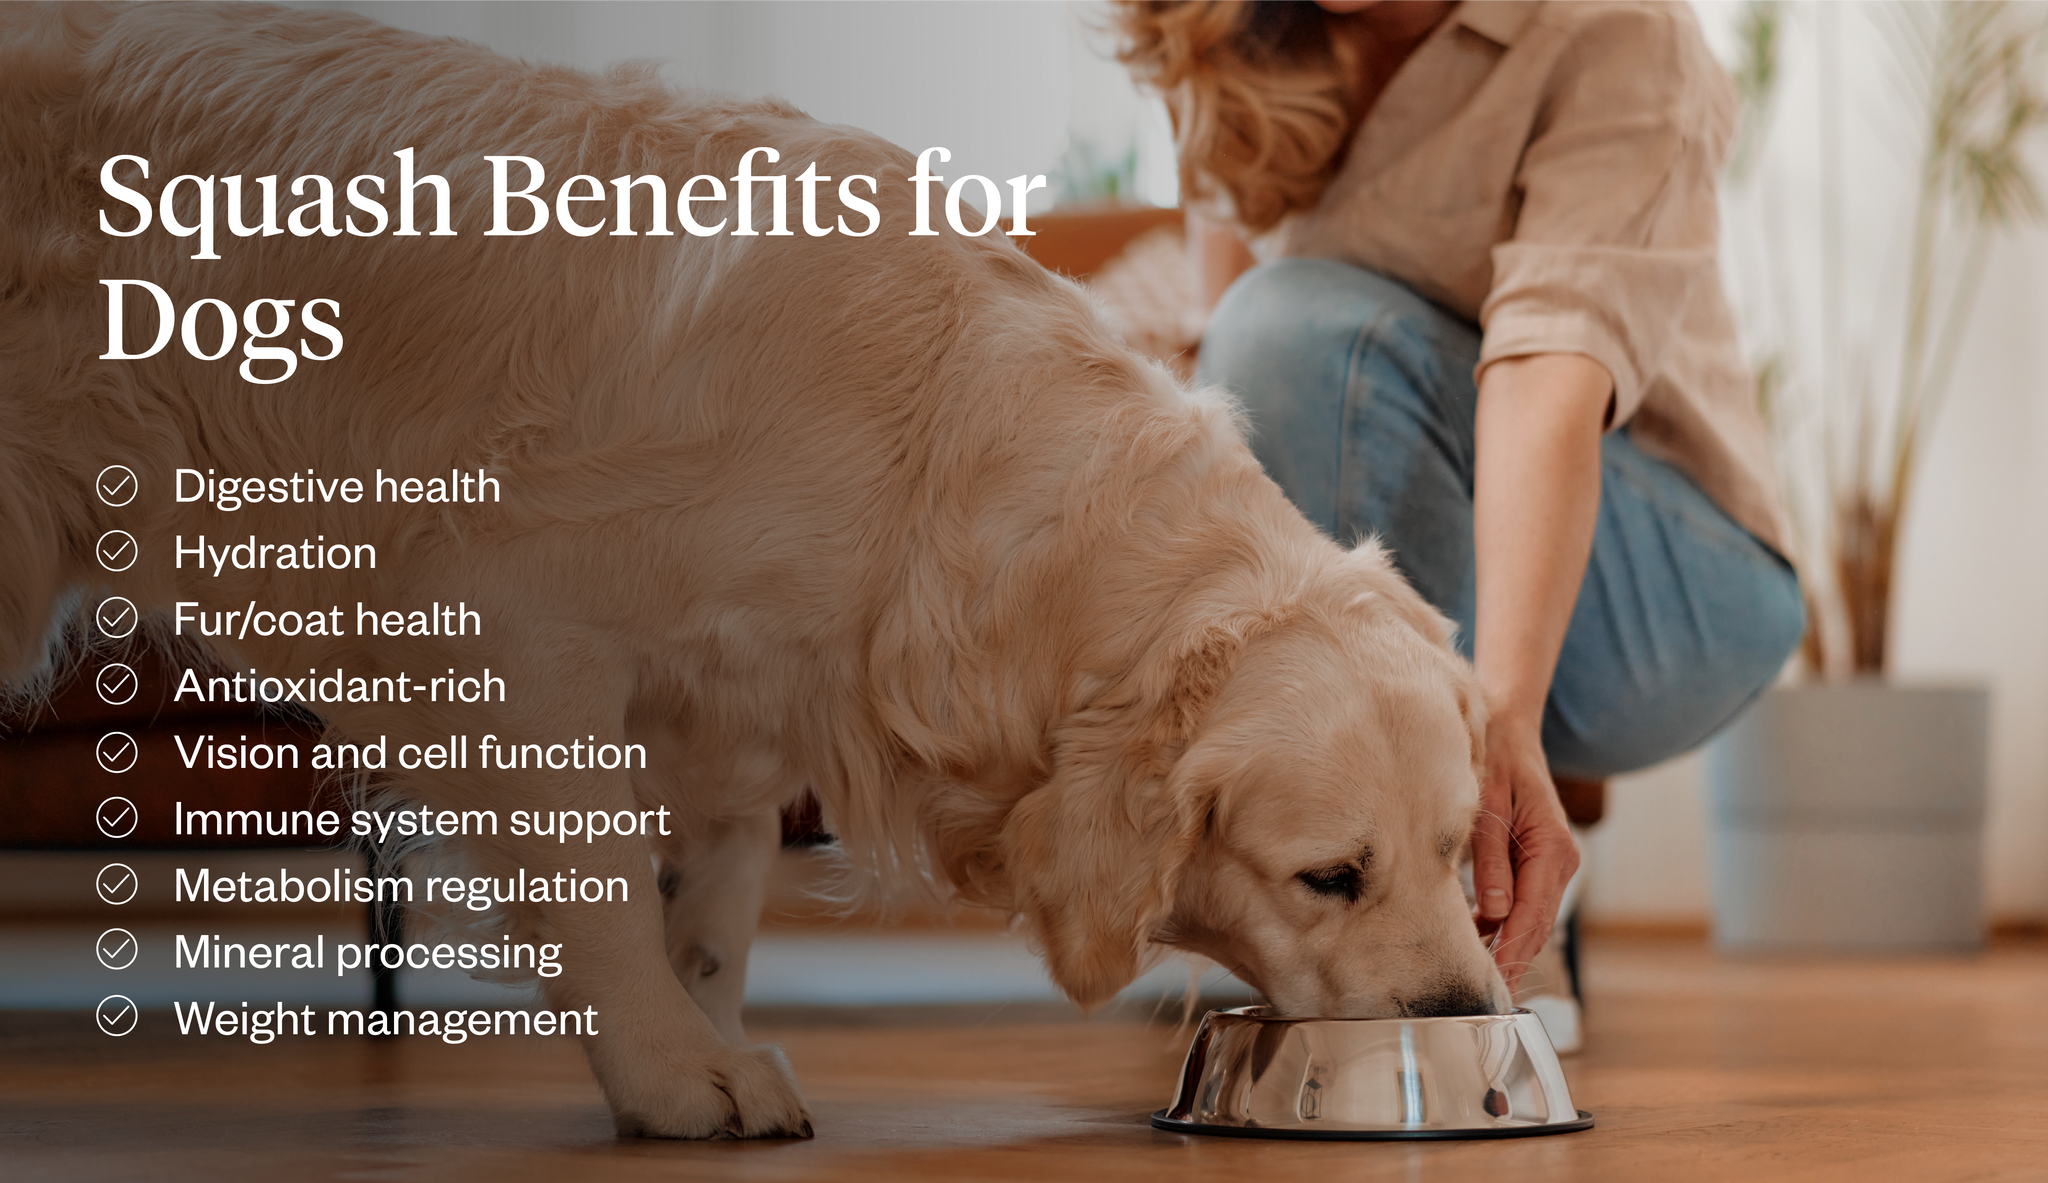 Squash benefits for dogs